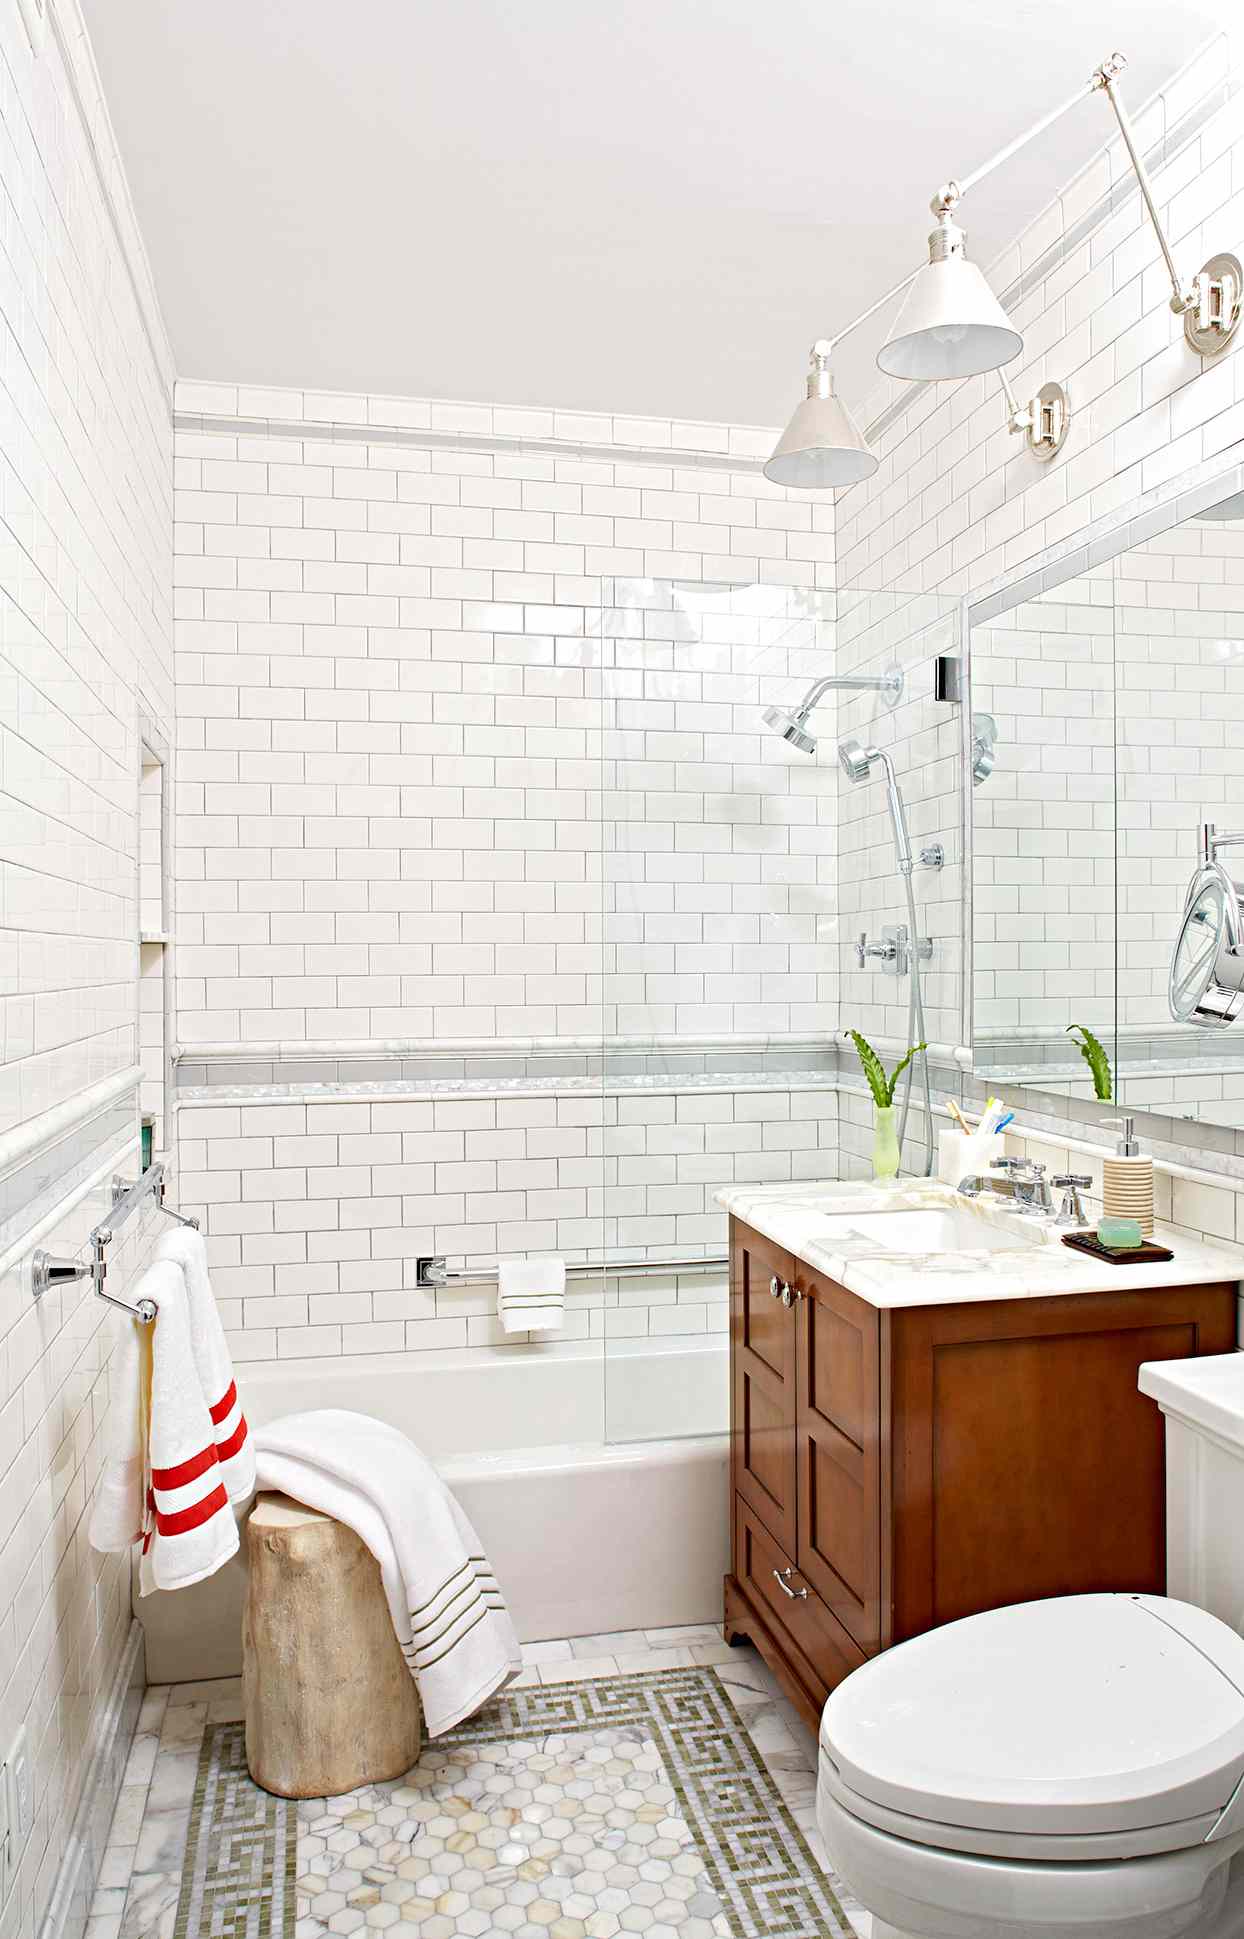 Tile A Shower Enclosure Or Tub Surround, Cost To Replace A Bathtub And Surround